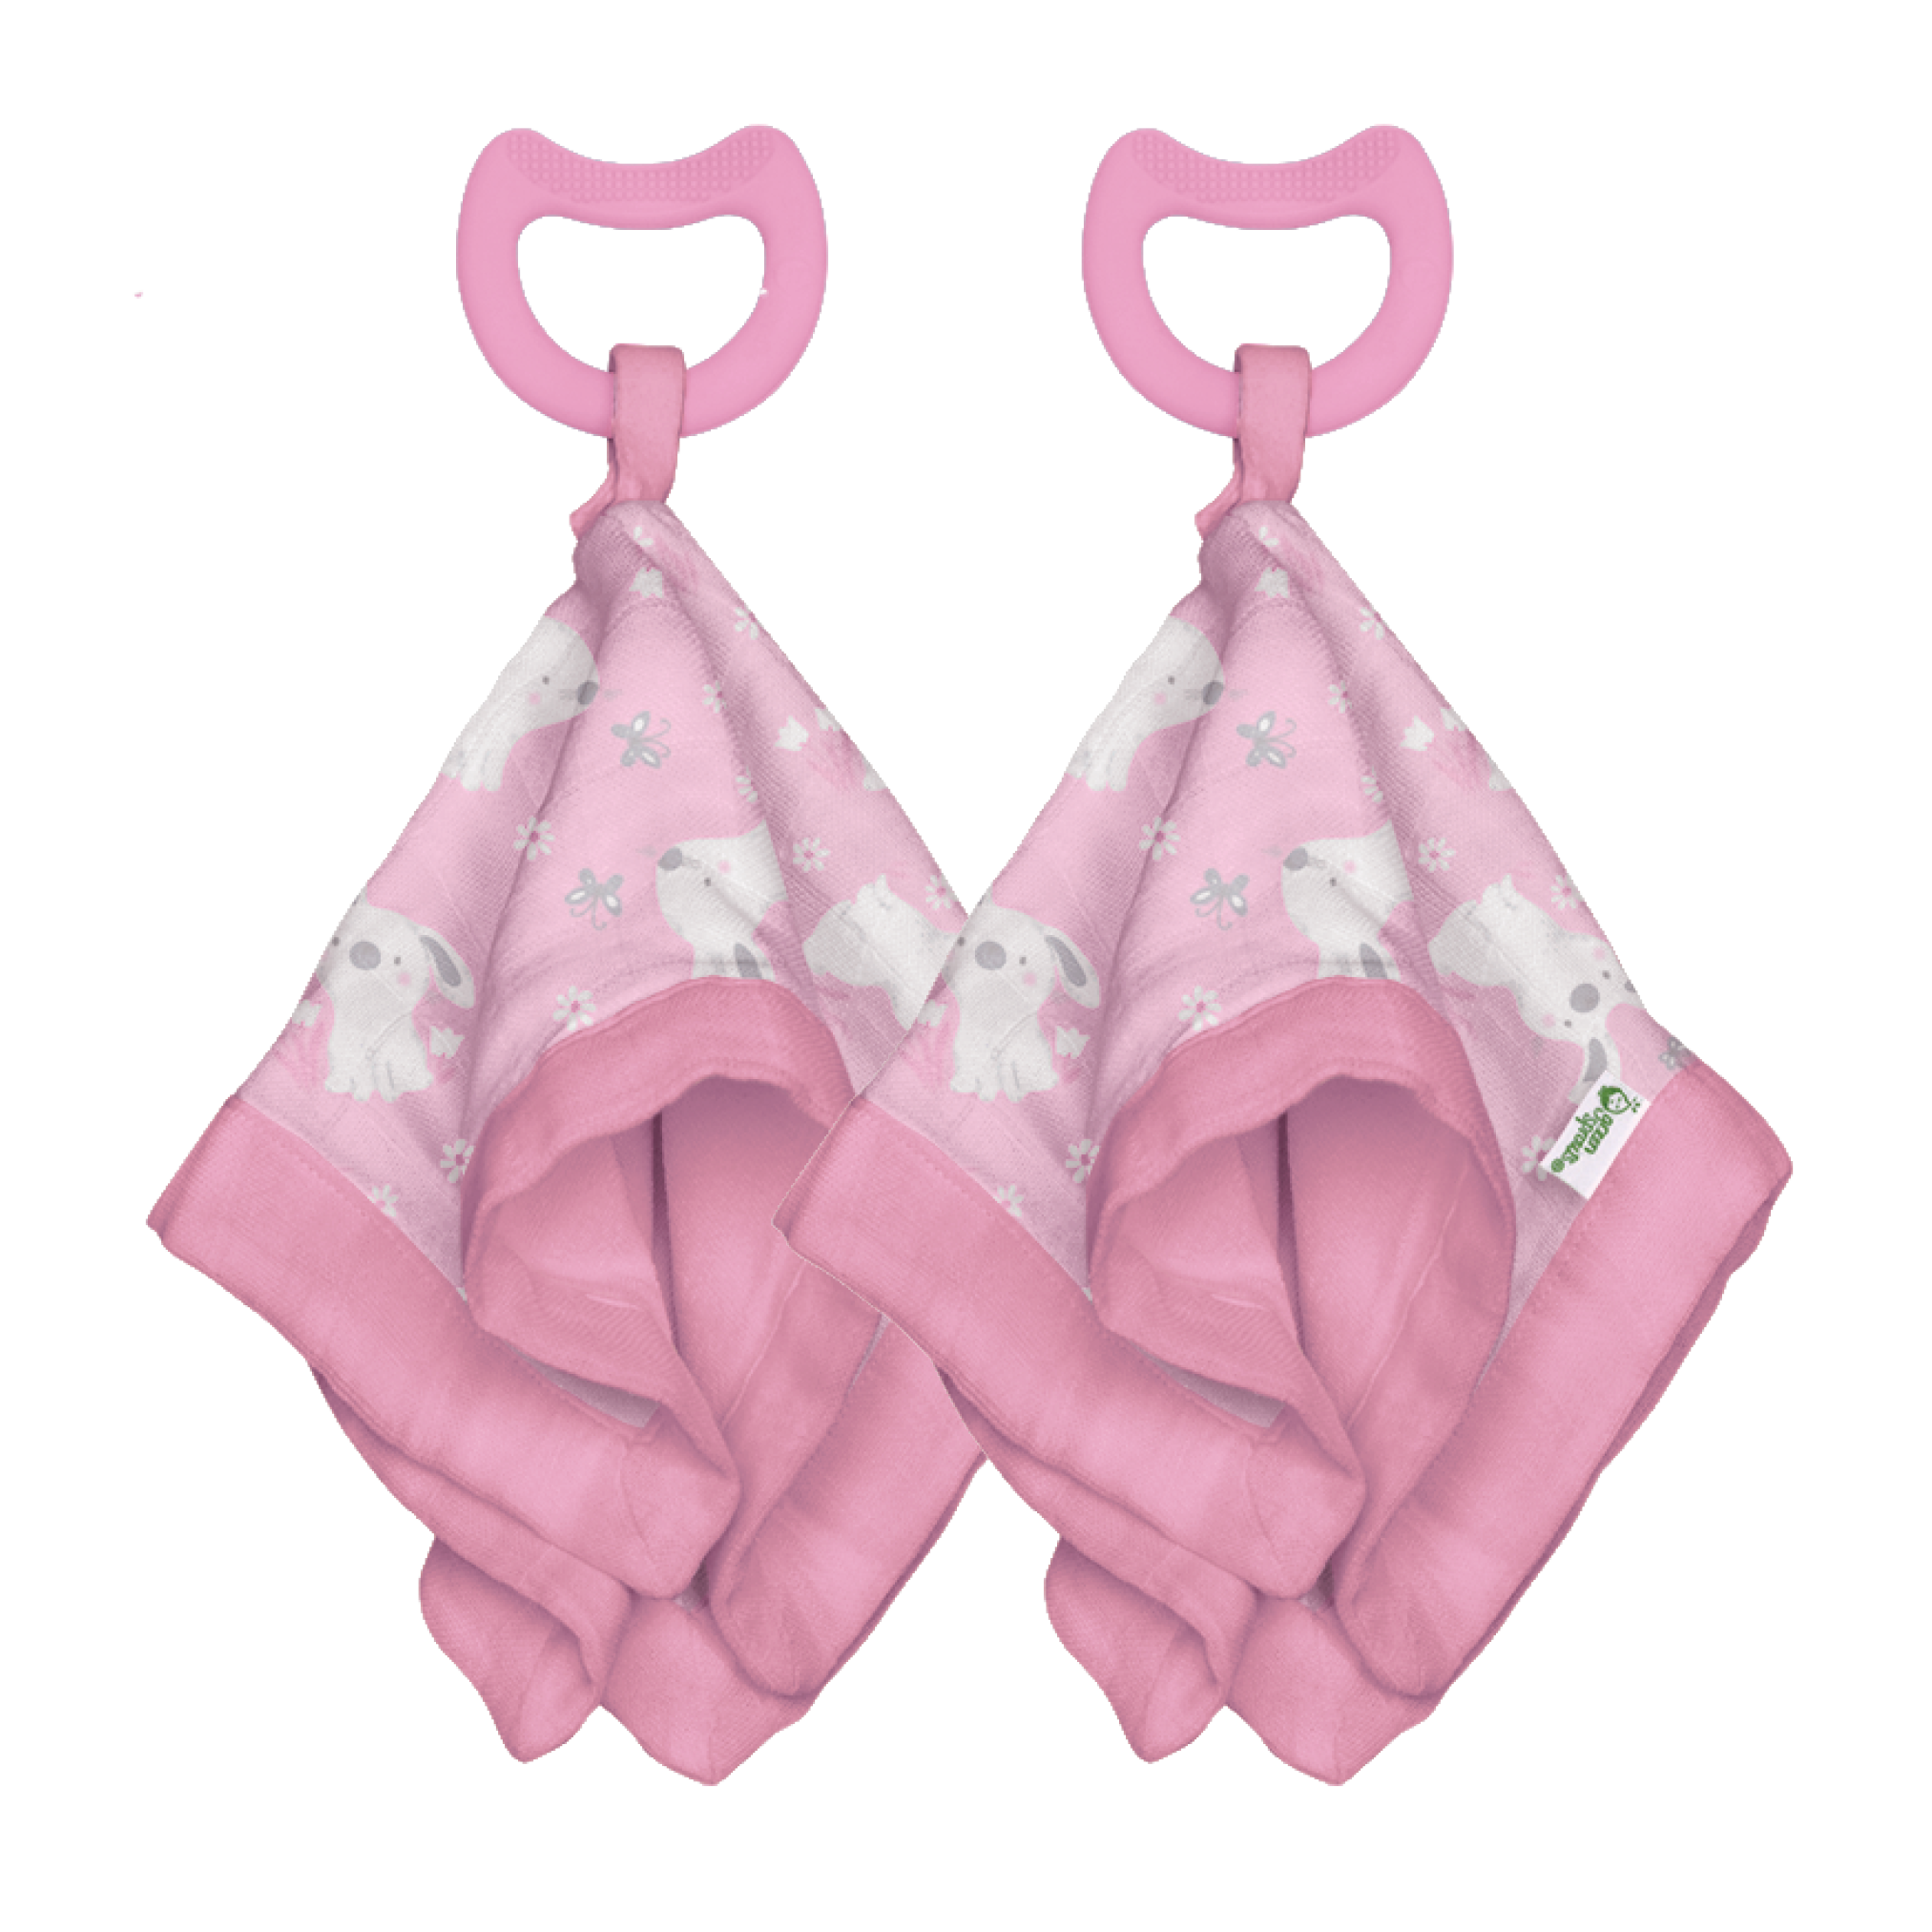 Muslin Snuggle Blankie Teether made from Organic Cotton (2 pack)